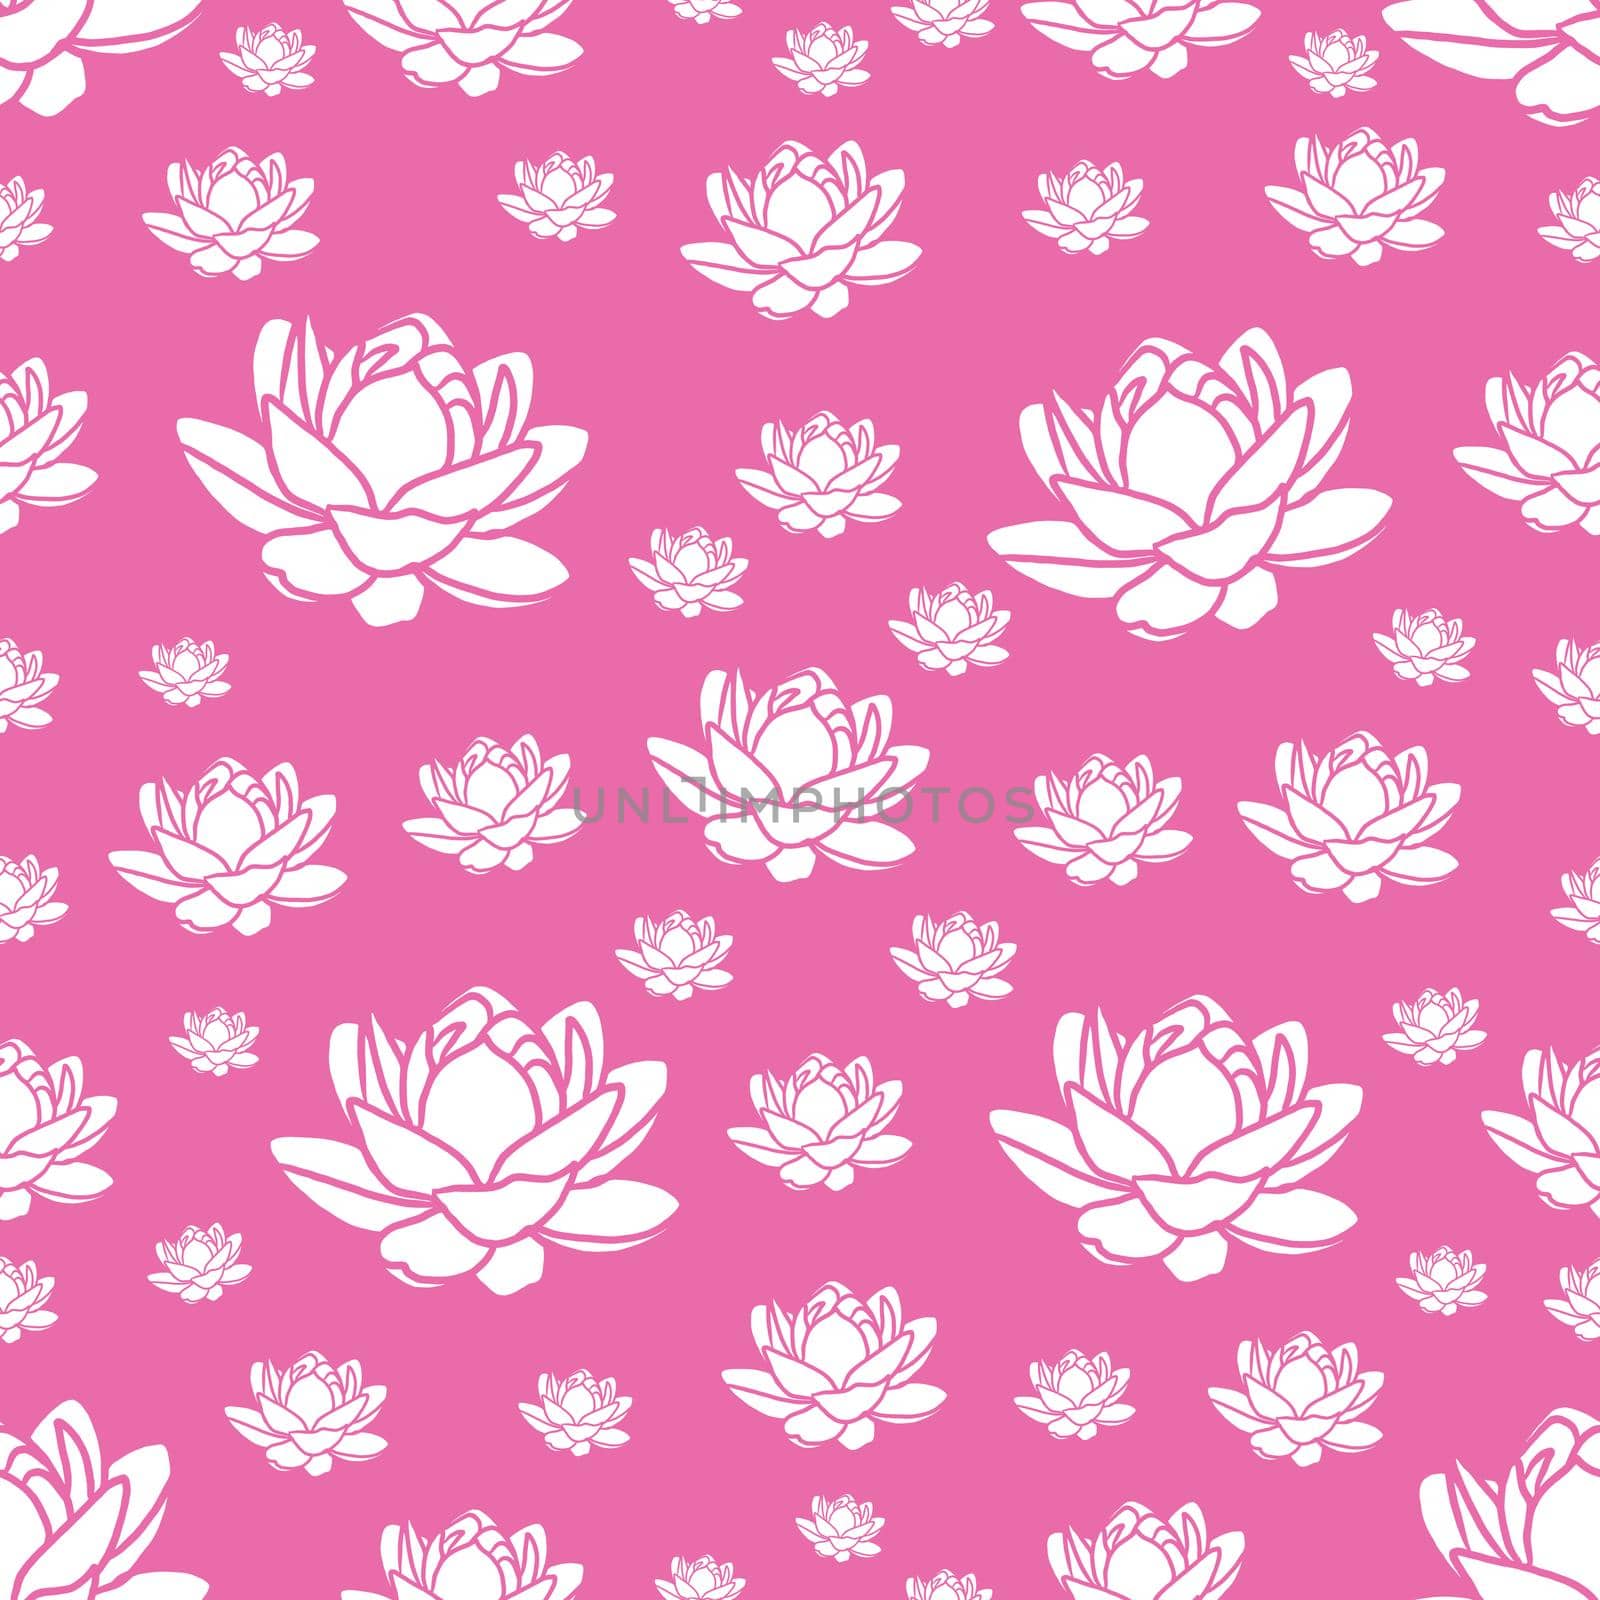 modern pink and white seamless repeating lotus flower design for fabric or wallpaper